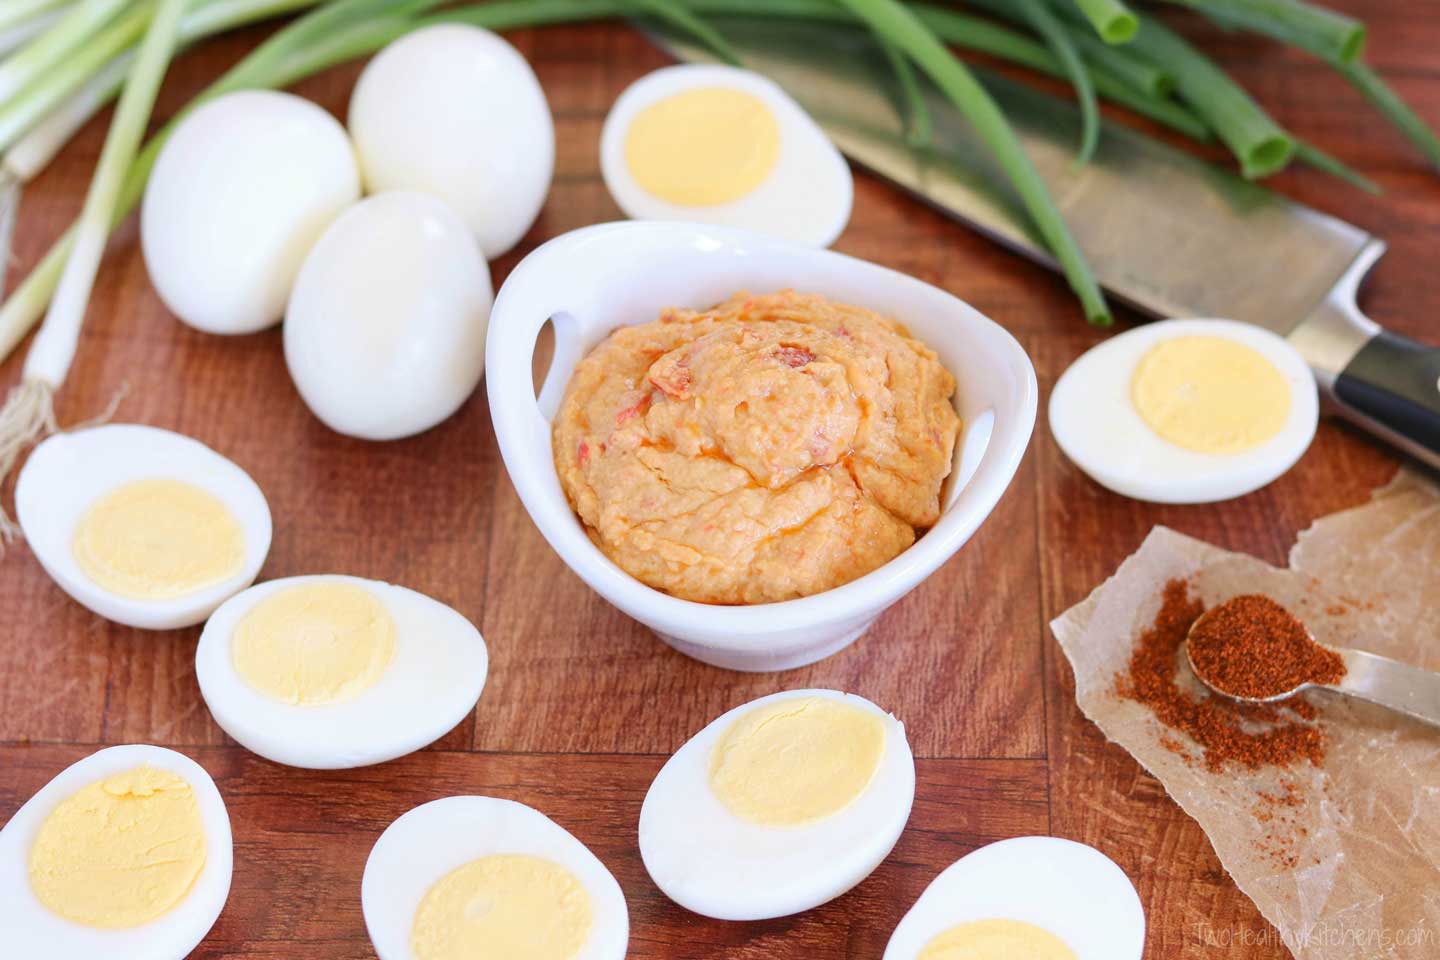 An easy, protein-packed, make-ahead! This Mediterranean Hummus Deviled Egg recipe features creamy roasted red pepper hummus and fresh basil. Fast enough for last-minute picnics and tailgates, yet stunning enough for fancy hors d’oeuvres parties! 